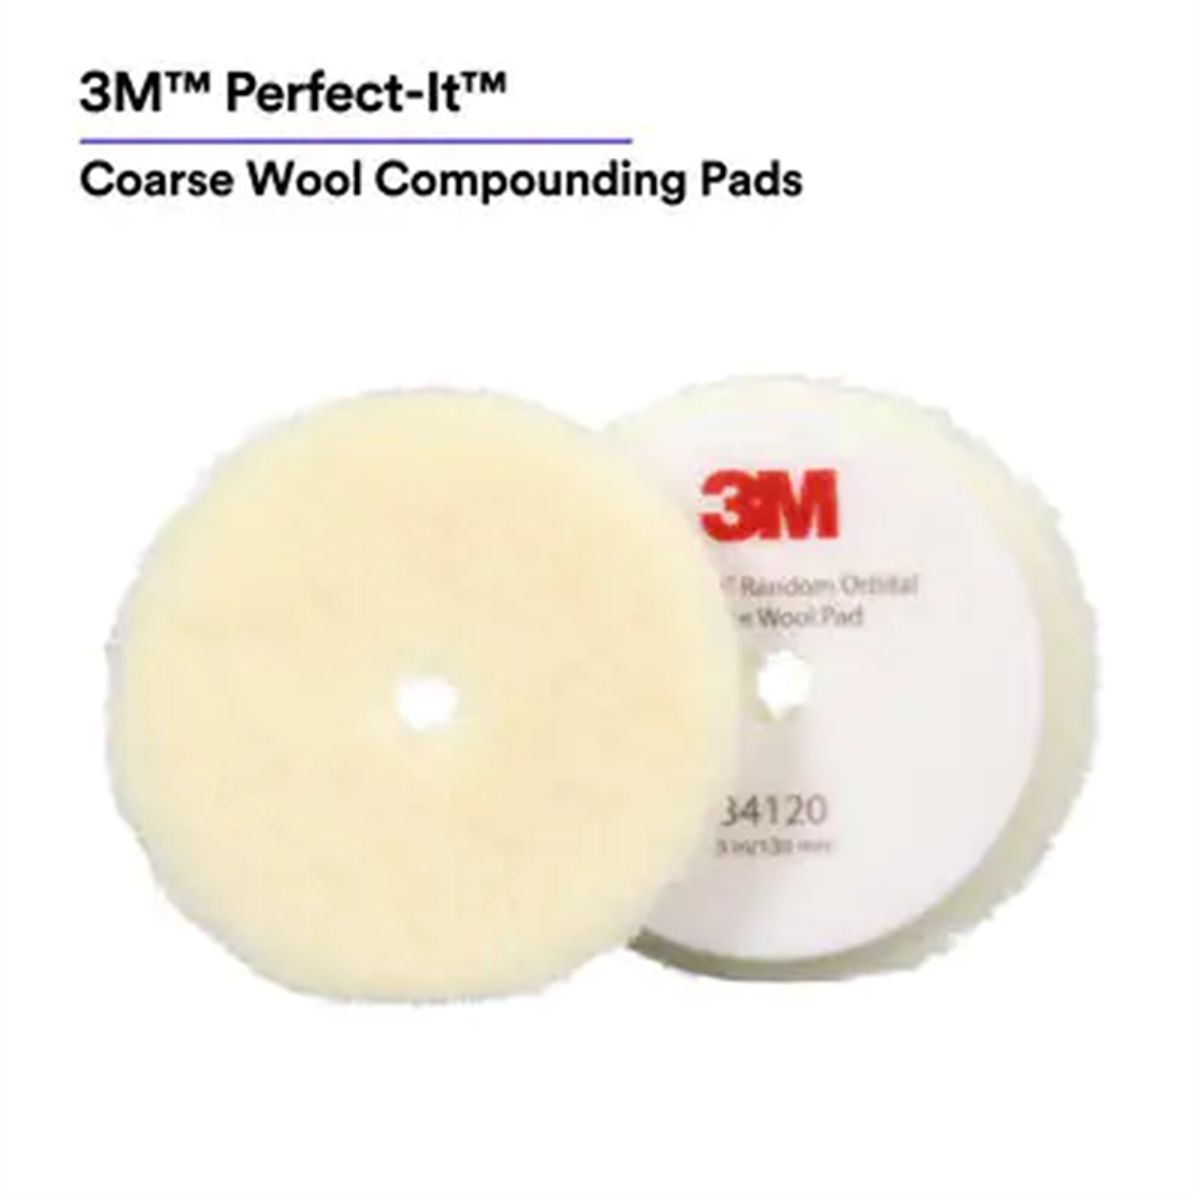 Picture of 3M MMM34120 5 in. Perfect-It Random Orbital Coarse Wool Compounding Pad, White - 2 Pads per Bag